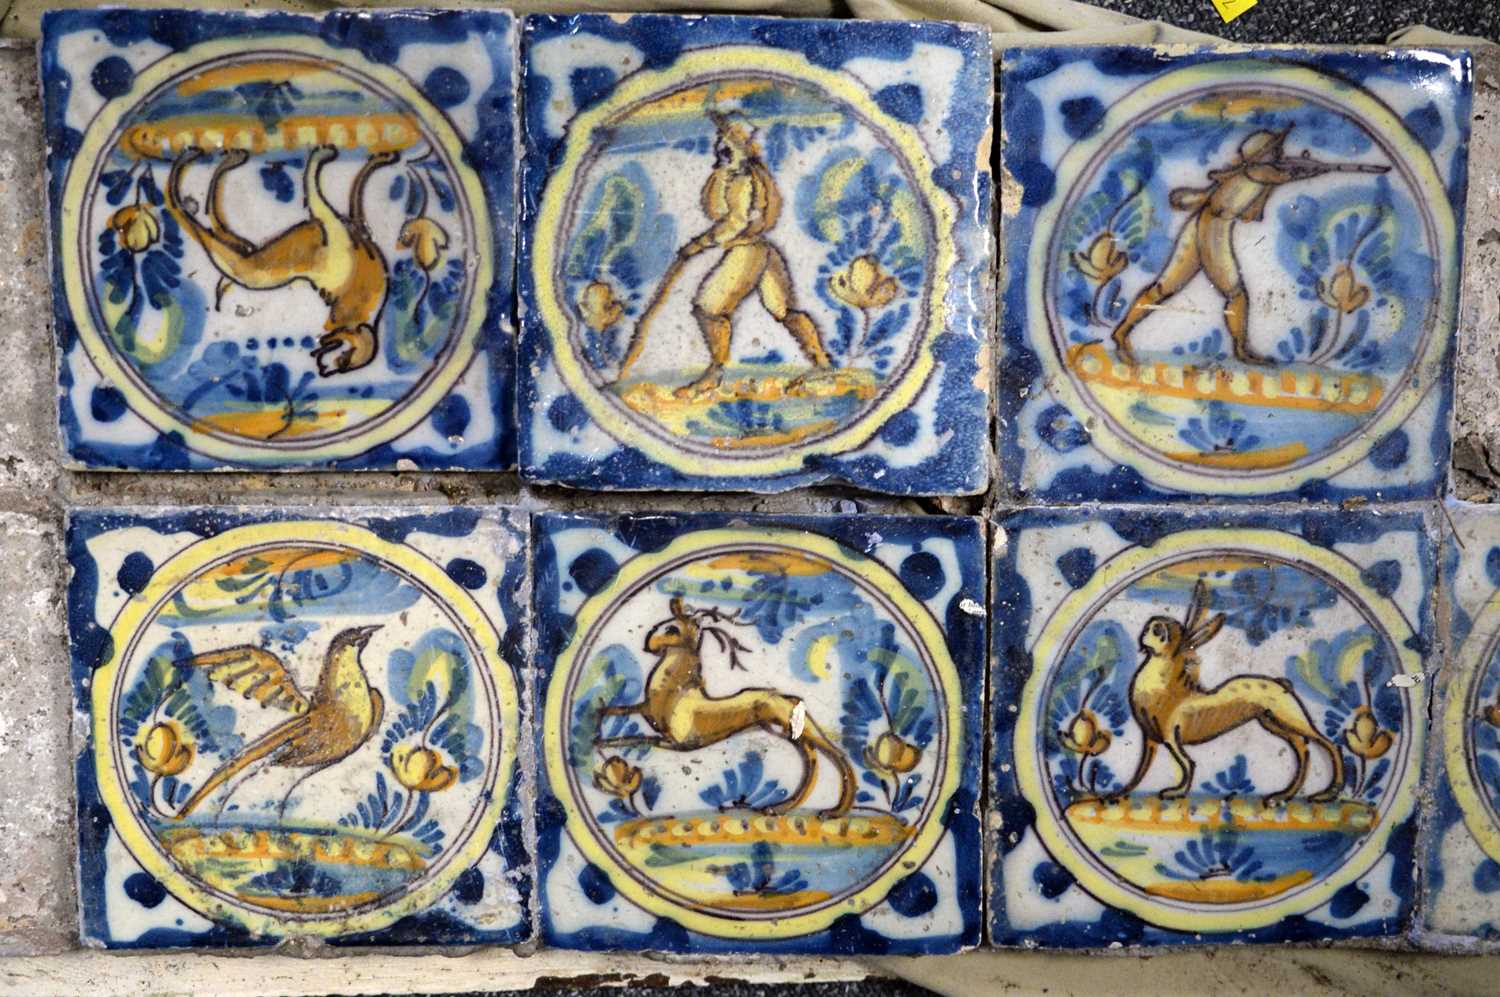 Ten early Spanish delft tiles - Image 2 of 3